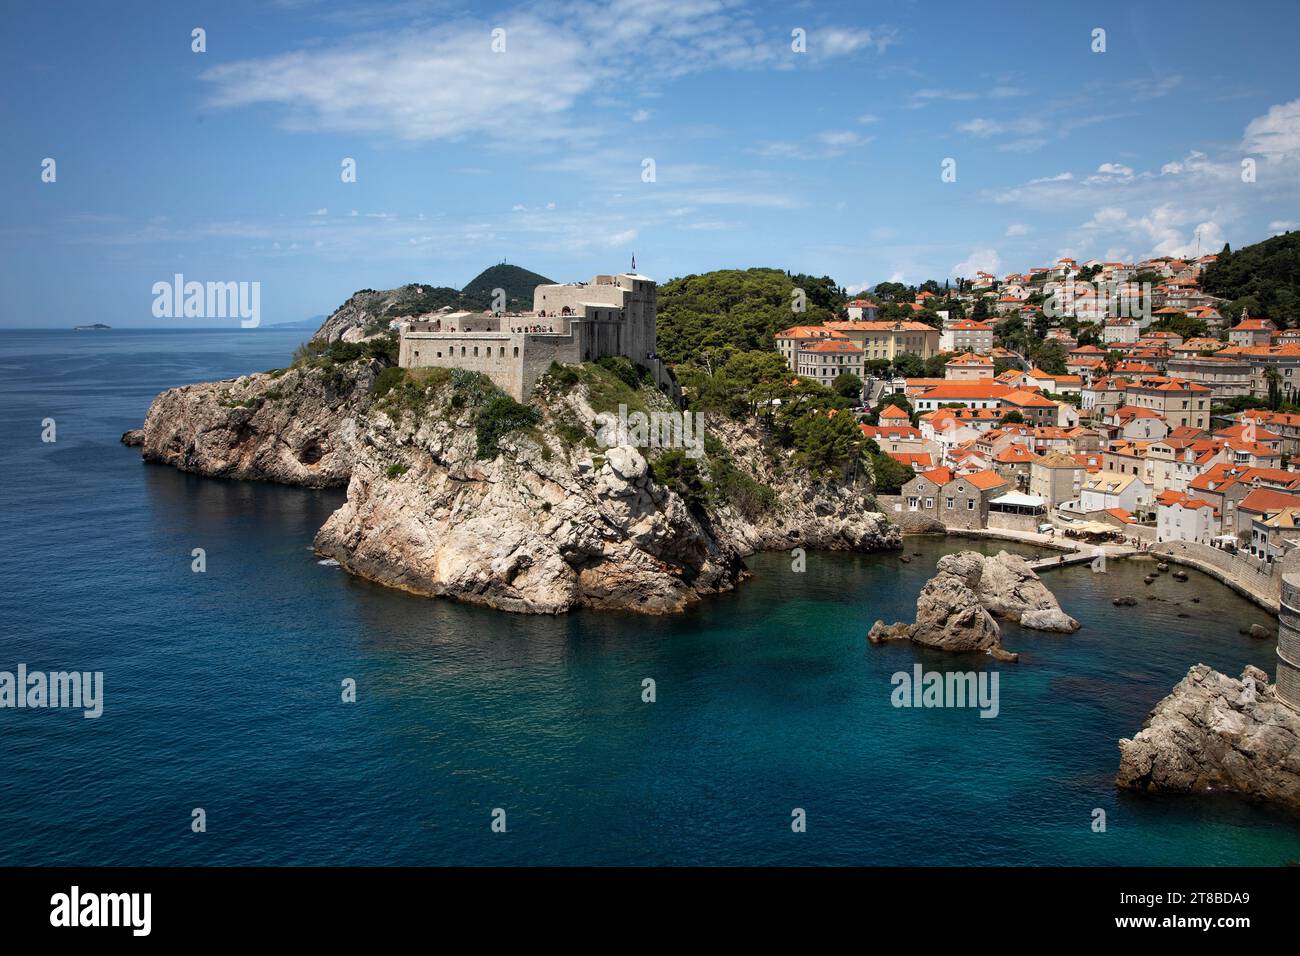 Fort Lovrijenac or St. Lawrence Fortress, often called “Dubrovnik’s Gibraltar”, is a fortress that protected this coastal city in Croatia. Stock Photo